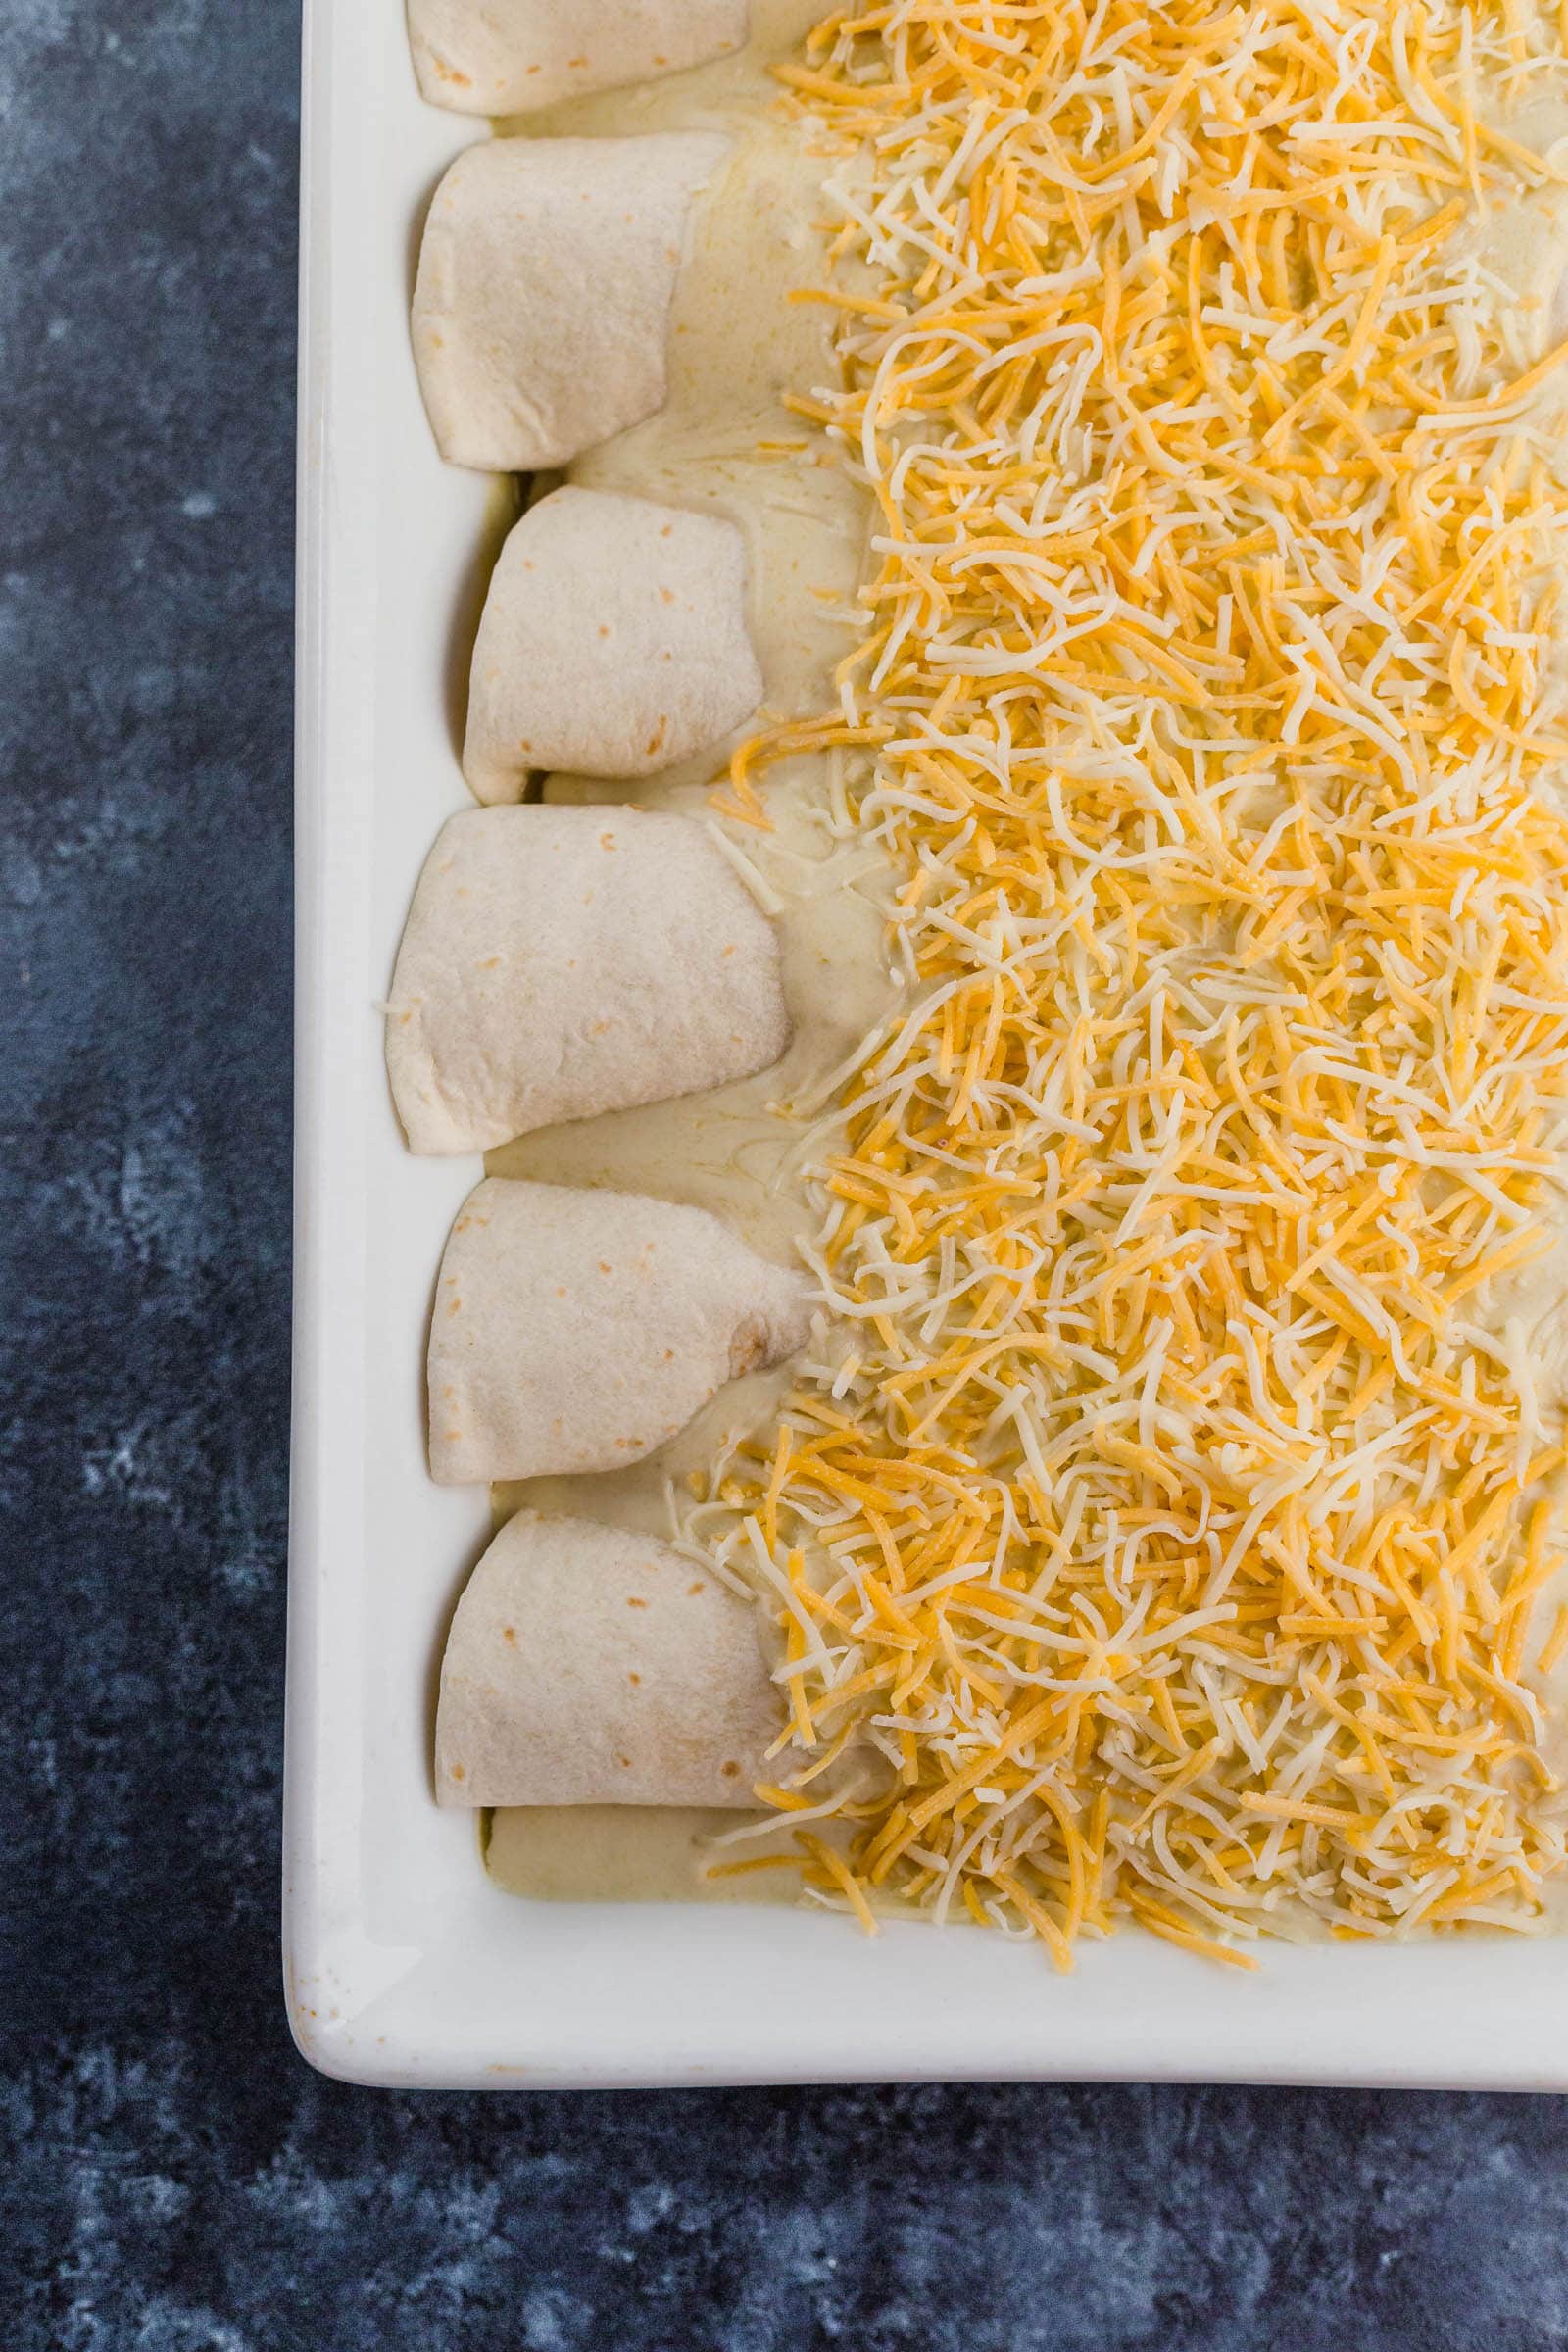 A dish of enchiladas topped with shredded cheese, before baking